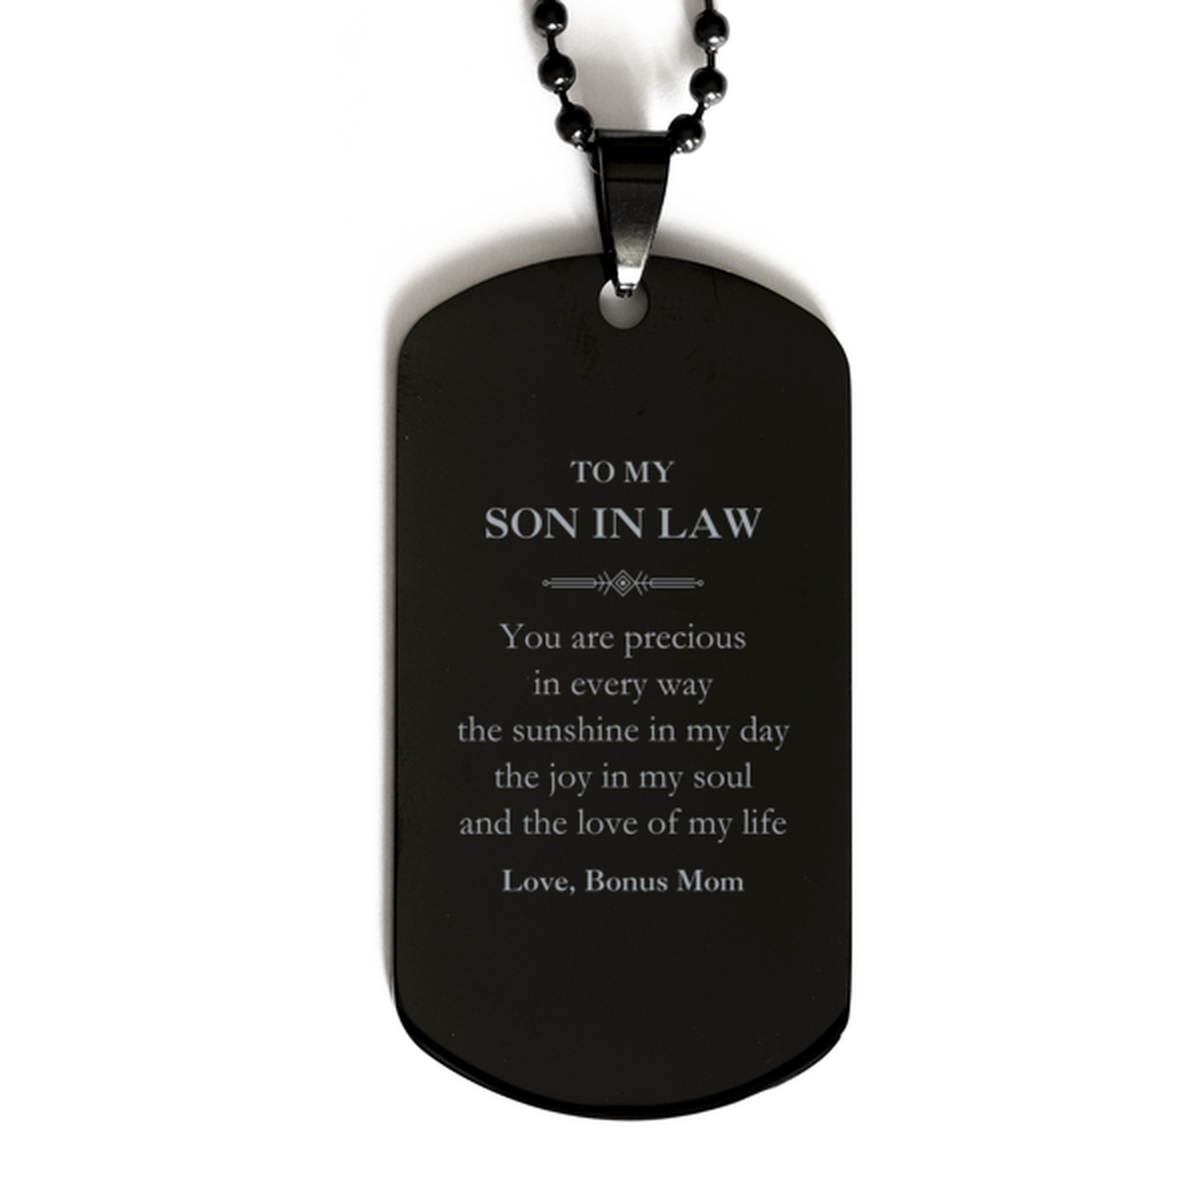 Graduation Gifts for Son In Law Black Dog Tag Present from Bonus Mom, Christmas Son In Law Birthday Gifts Son In Law You are precious in every way the sunshine in my day. Love, Bonus Mom